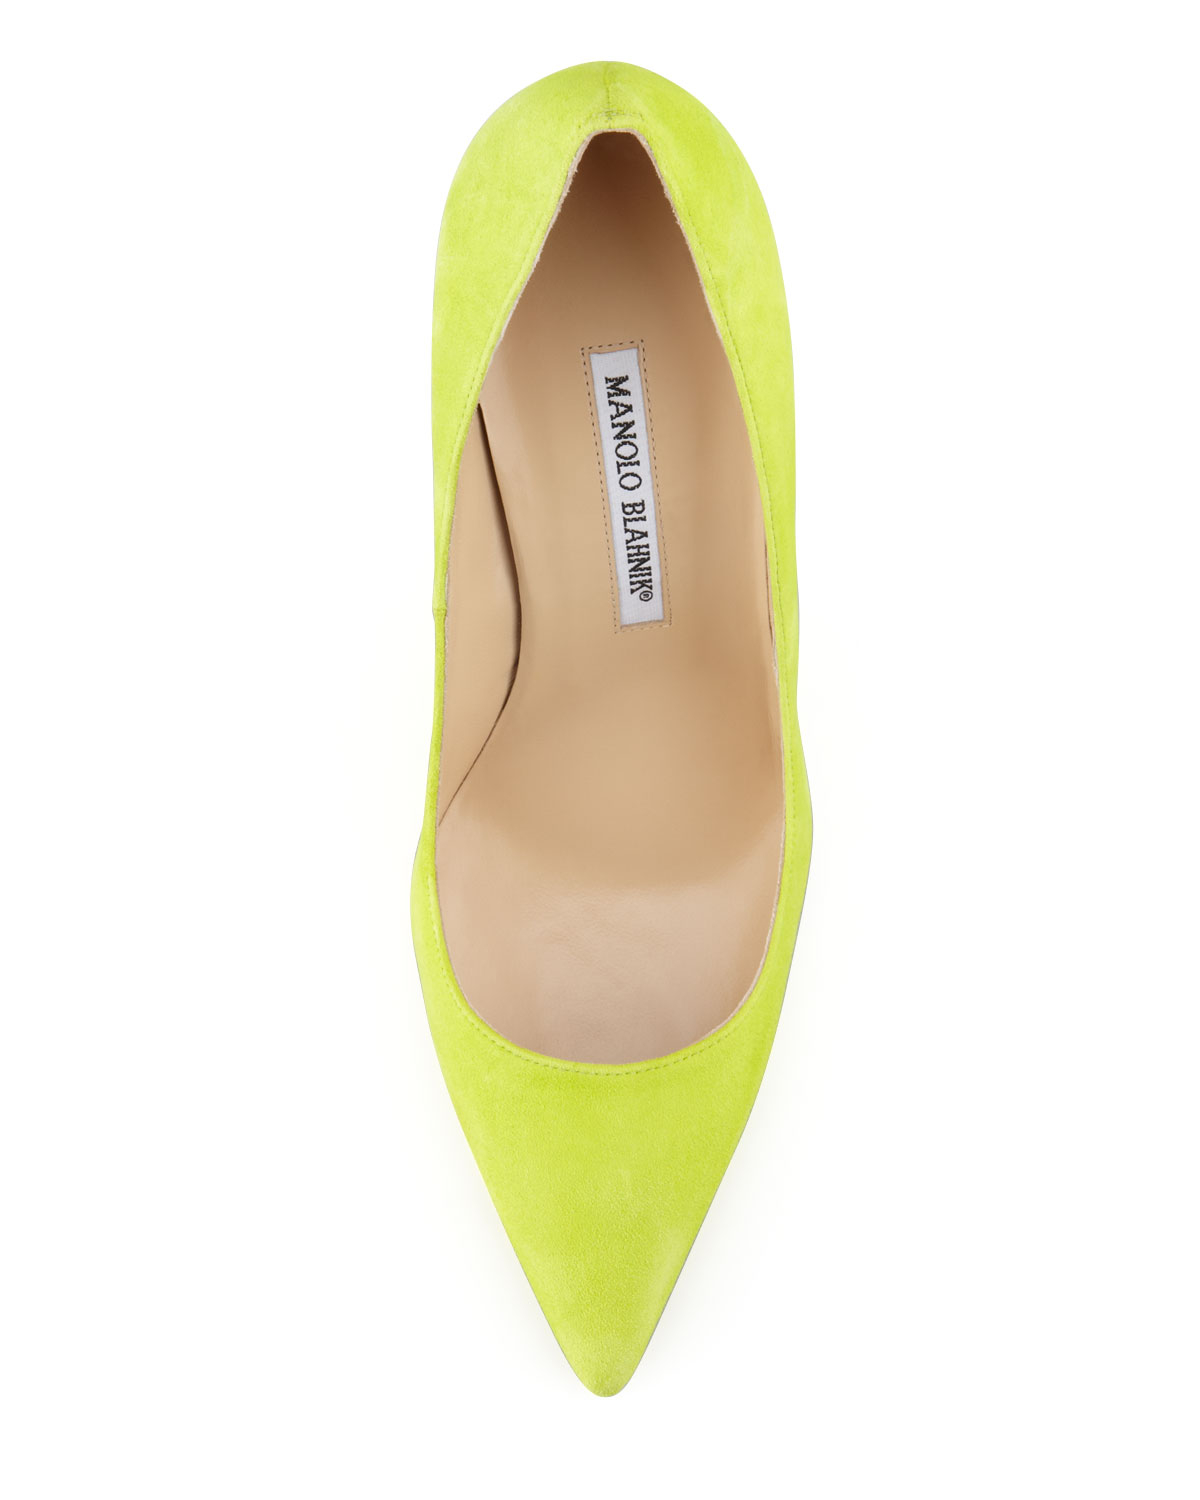 lime green suede shoes